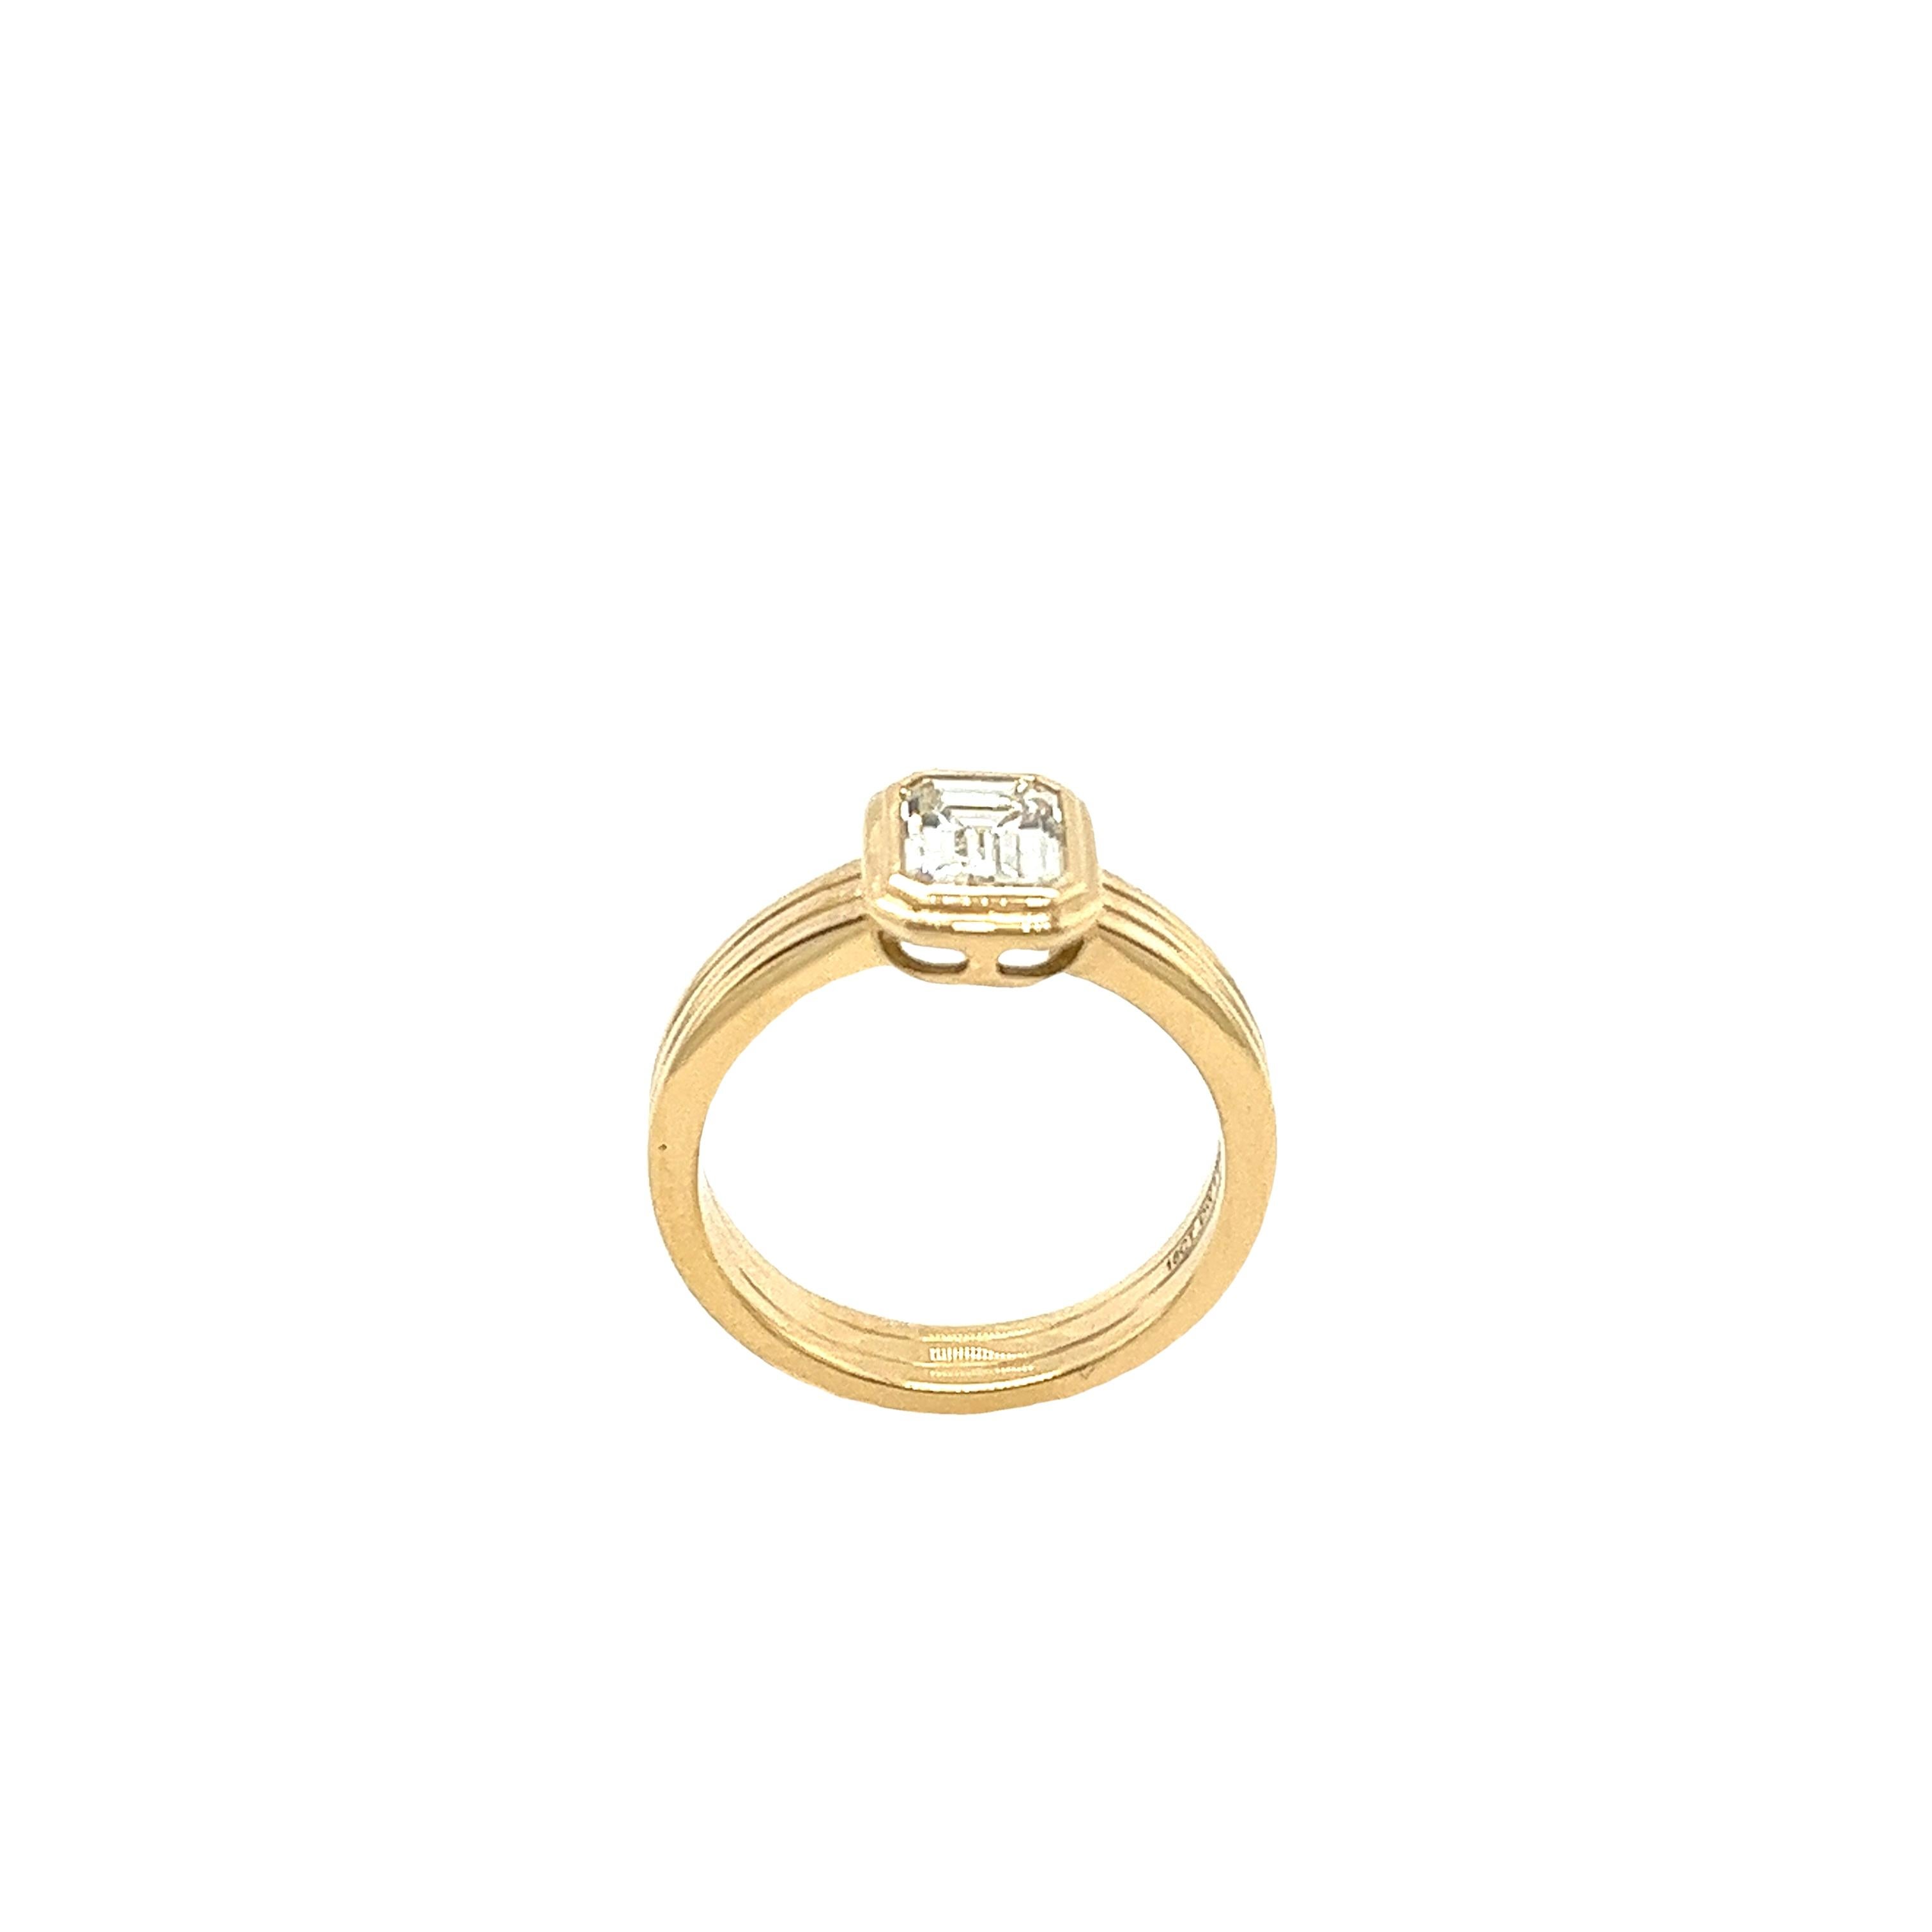 Modern Diamond Solitaire Ring Set With 1.01ct K/VS2 Emerald Cut Diamond, In 18ct Gold For Sale